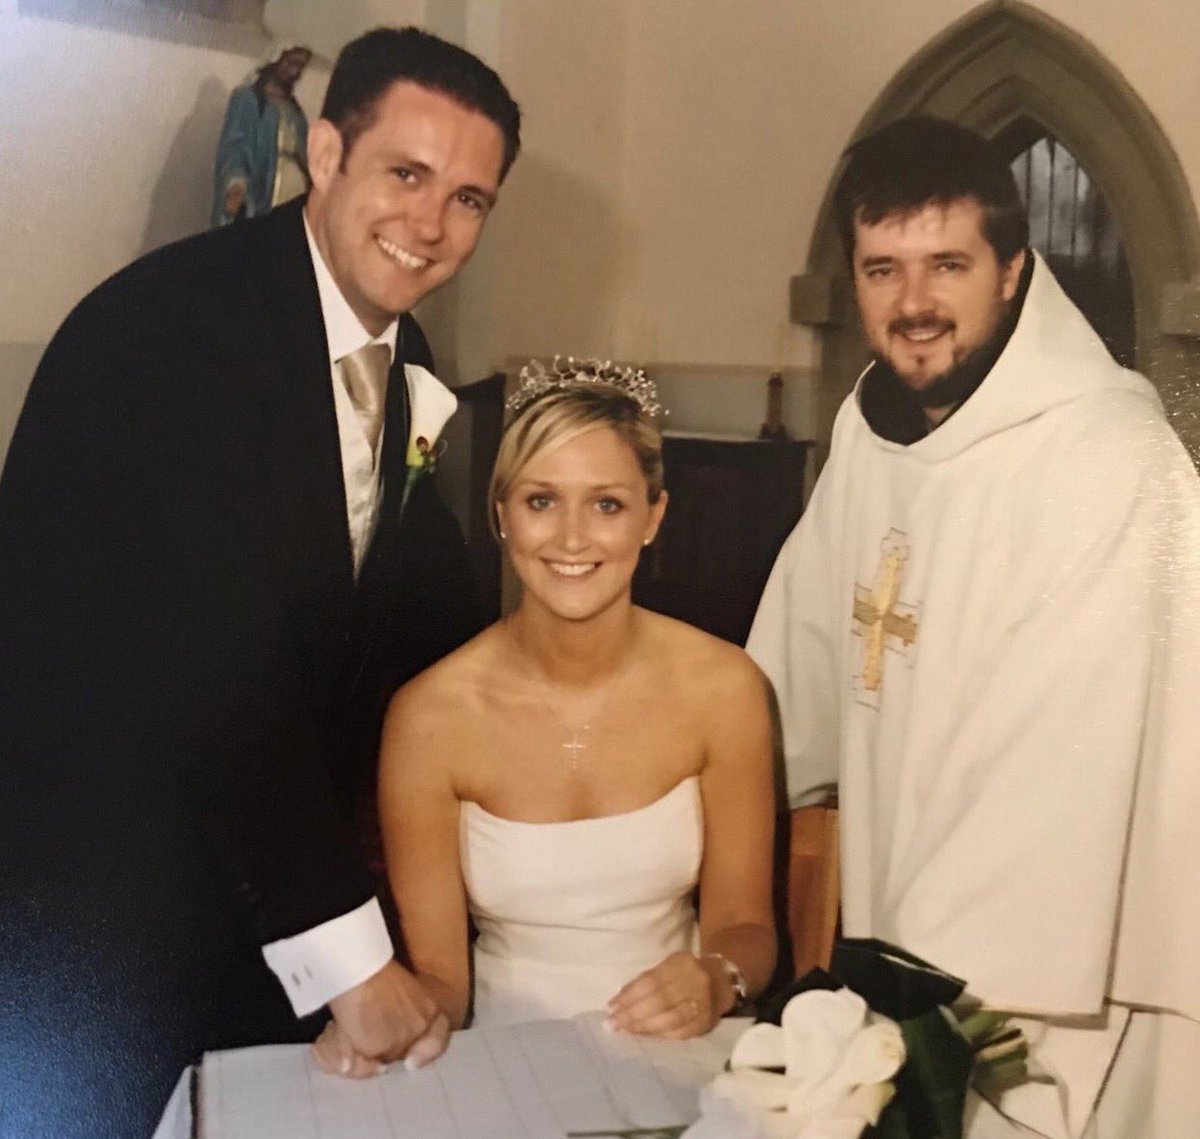 17 years ago this very day I married the love of my life ⁦@ciarathorn1⁩ with the help of ⁦@frbryanshortall⁩ #FeelsLikeYesterday